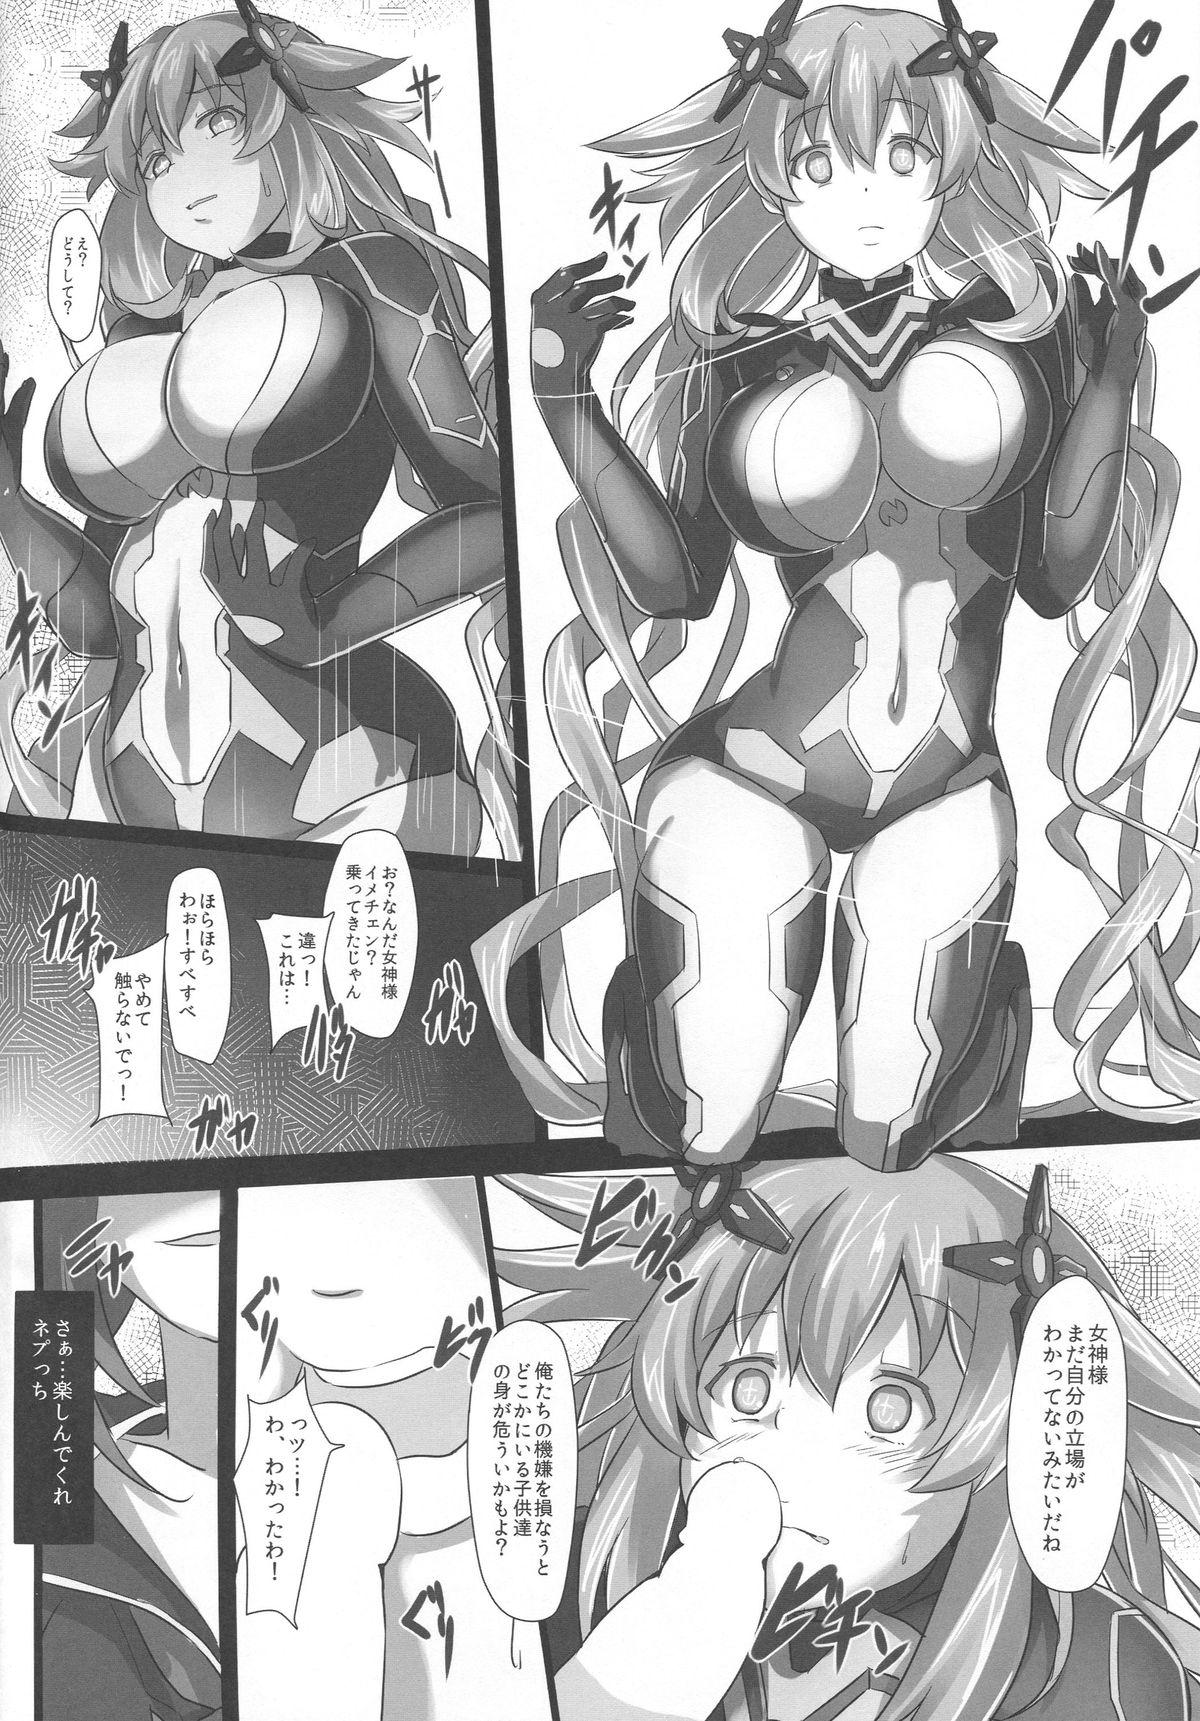 Classy Nightmare of goddess - Hyperdimension neptunia Family Roleplay - Page 5